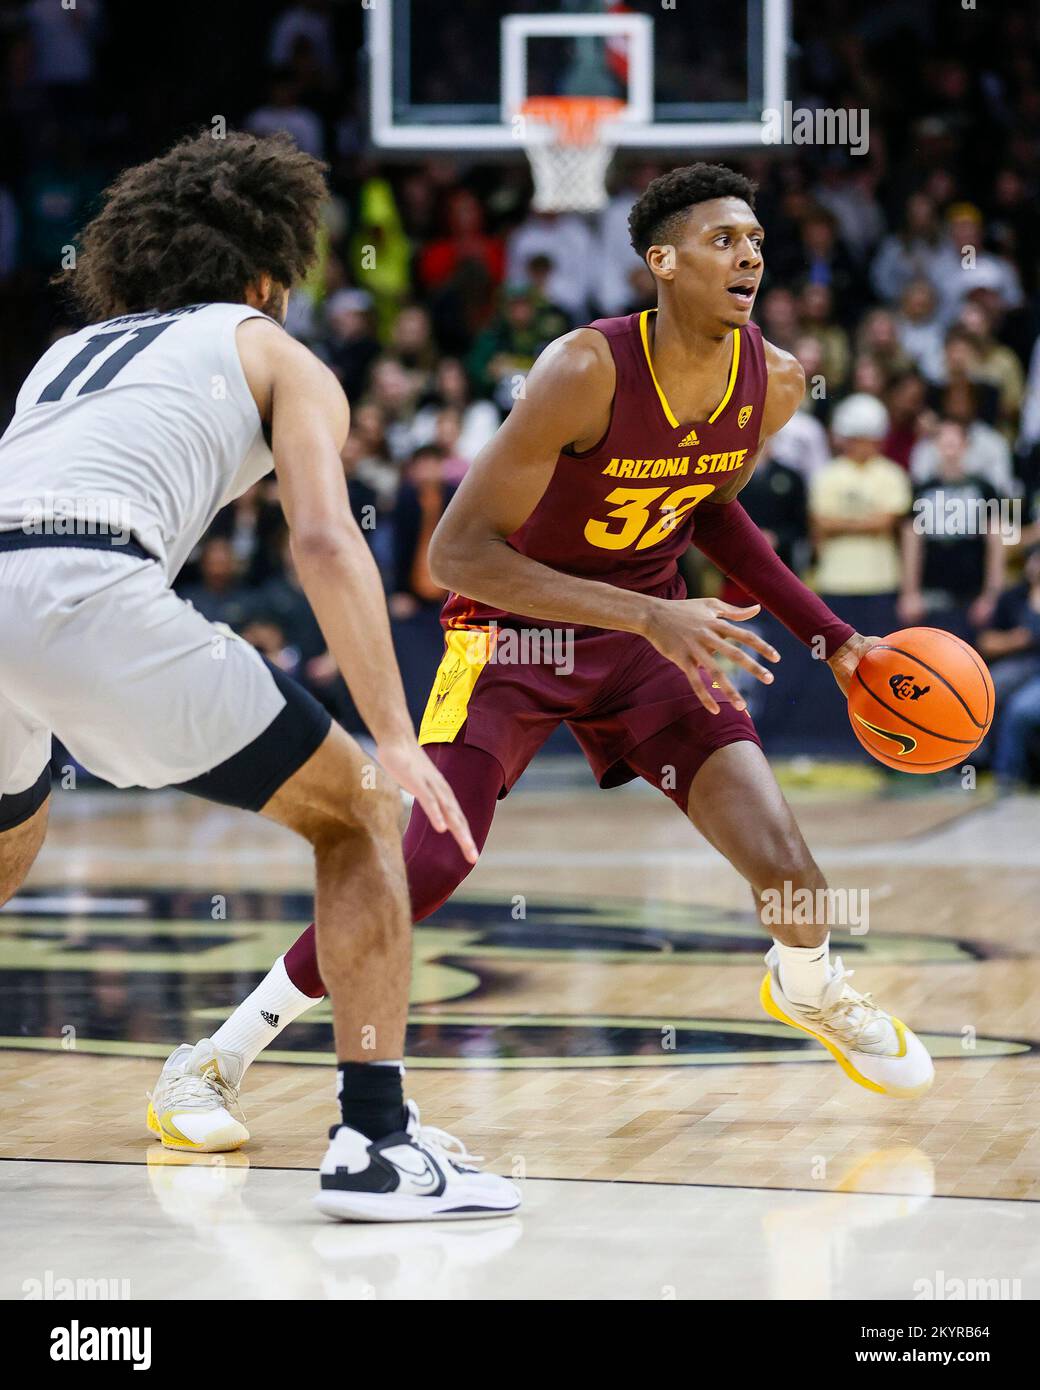 December 01, 2022: Arizona State Sun Devils forward Alonzo Gaffney (32)  looks to pass in the menâ€™s basketball game between Colorado and Arizona  State in Boulder, CO. Derek Regensburger/CSM/Sipa USA.(Credit Image: ©